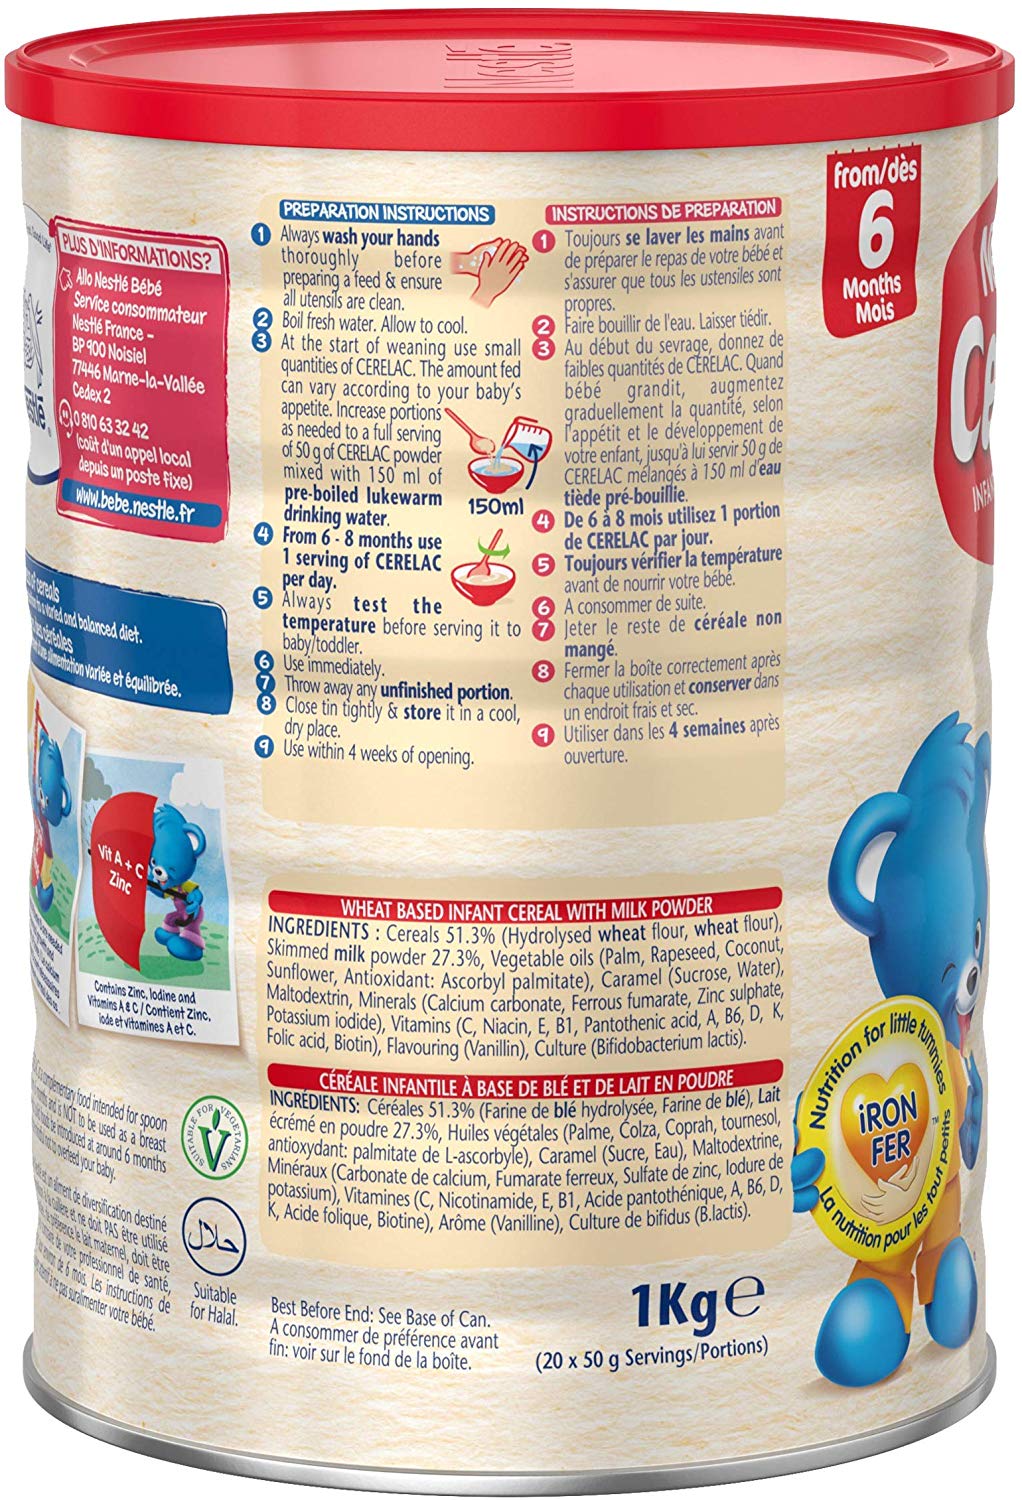 Nestle Baby Cereal Biscuit Powder from 6 months